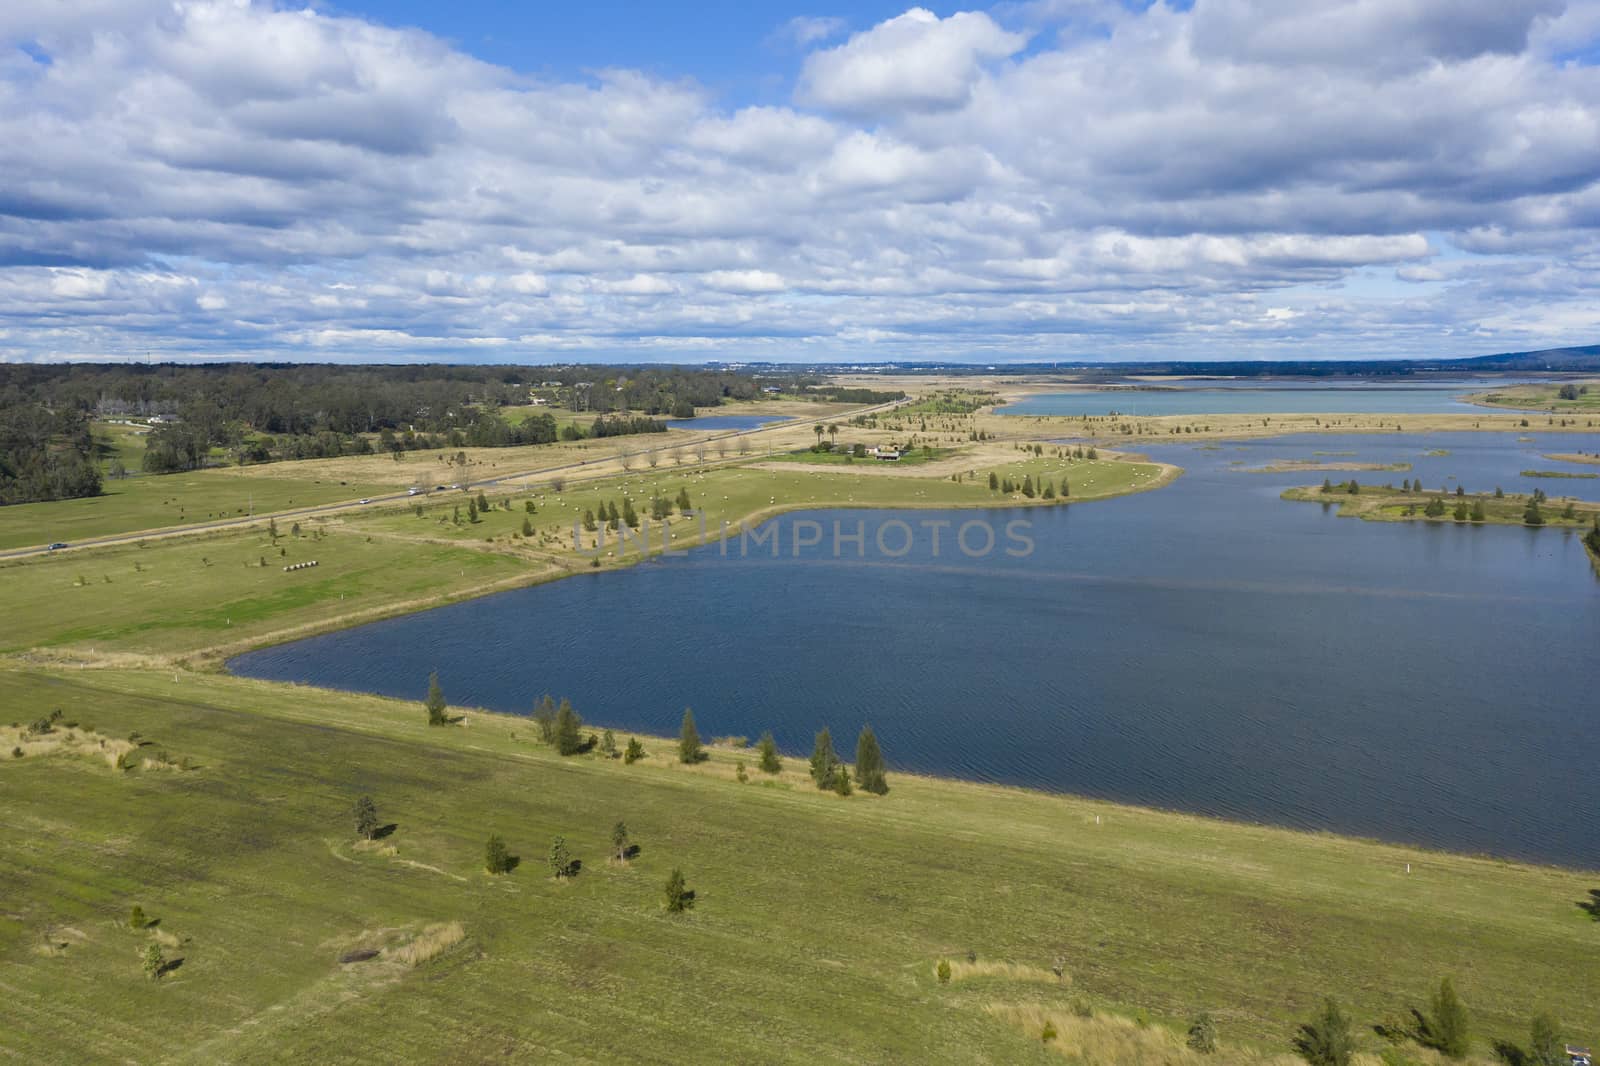 Aerial photograph of a large fresh water reservoir in regional Australia by WittkePhotos